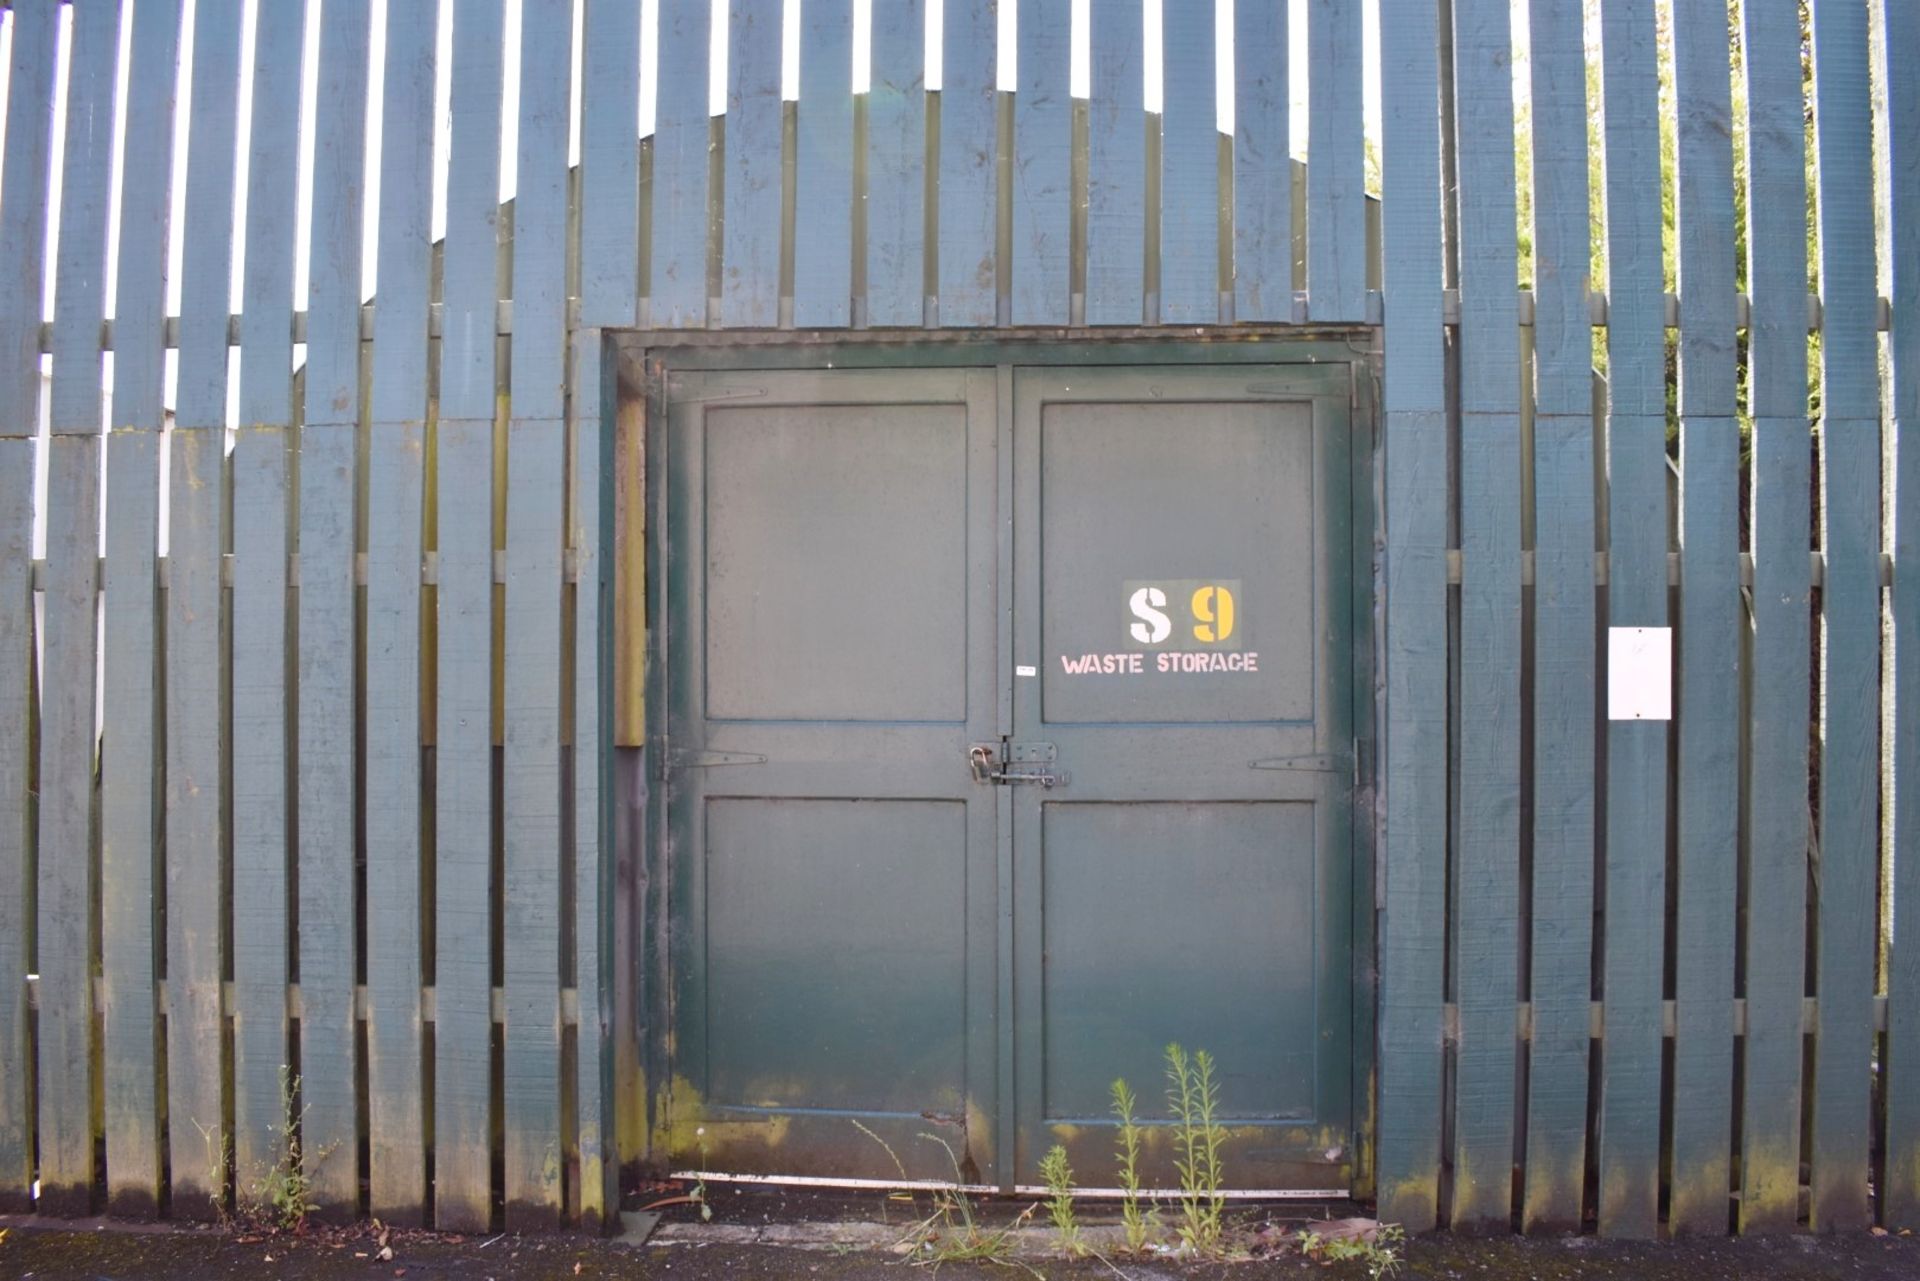 1 x Quonset Storage Building With Hinged Doors - Lightweight Steel Structure - H318 x L1110 x W500